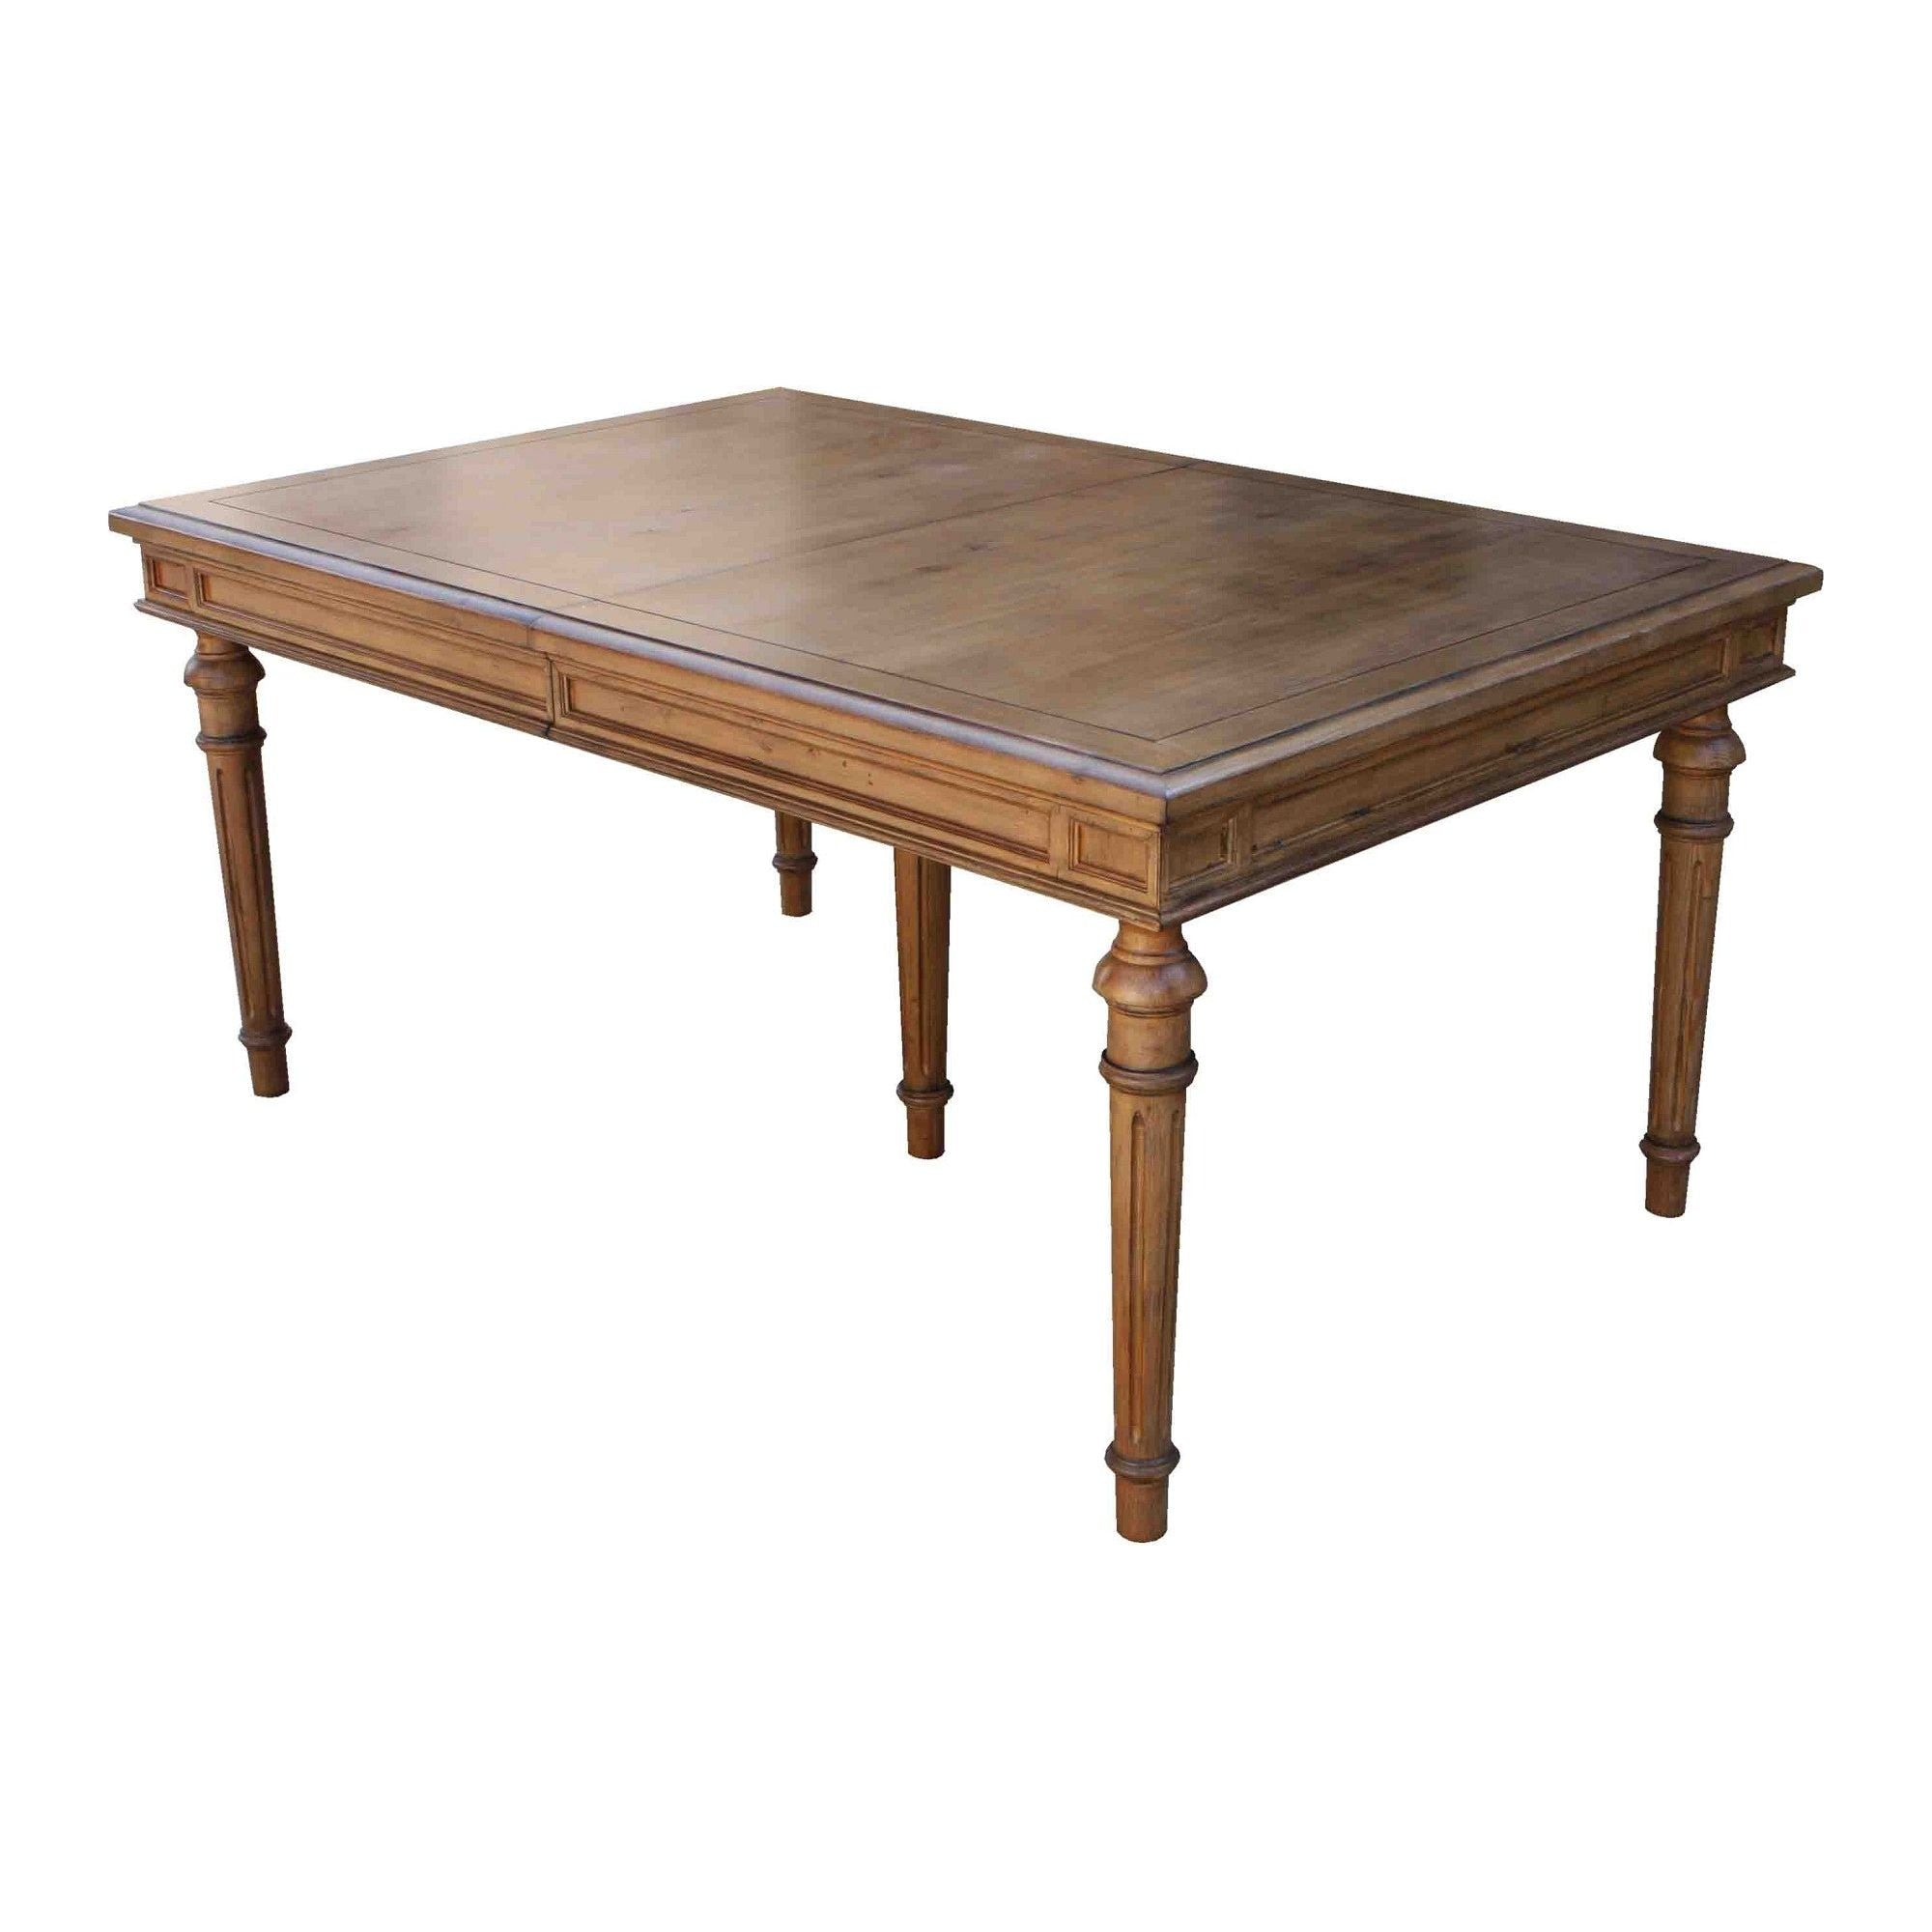 Classic Reclaimed Wood Colonial Fluted Leg Dining Table With Center Extension